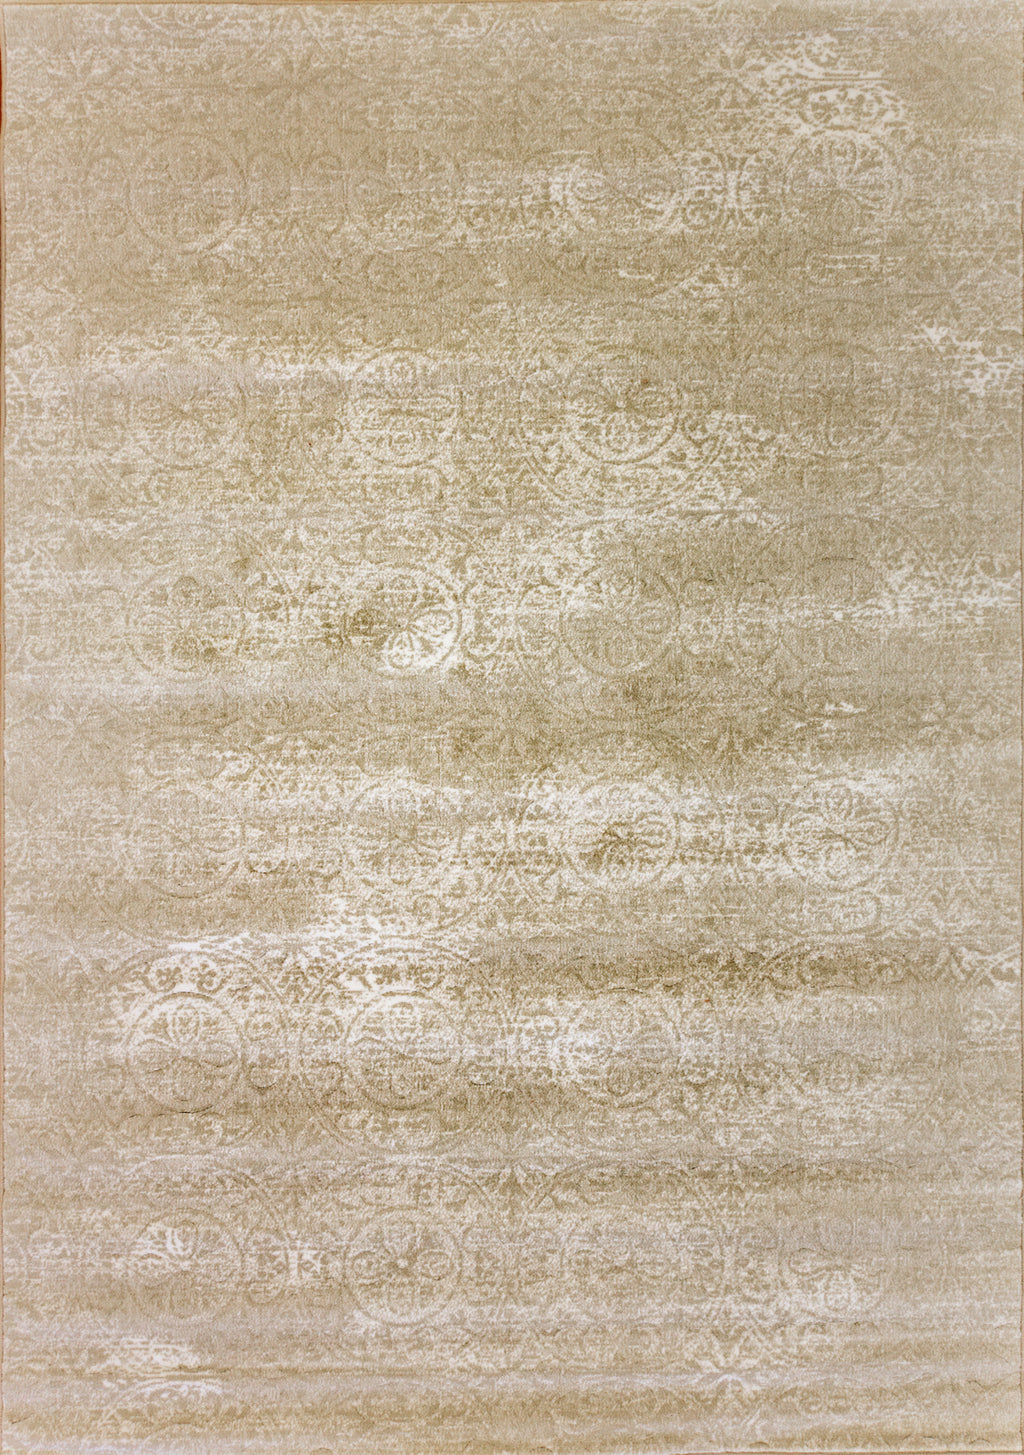 Dynamic Rugs Imperial 12148 Cream Area Rug main image